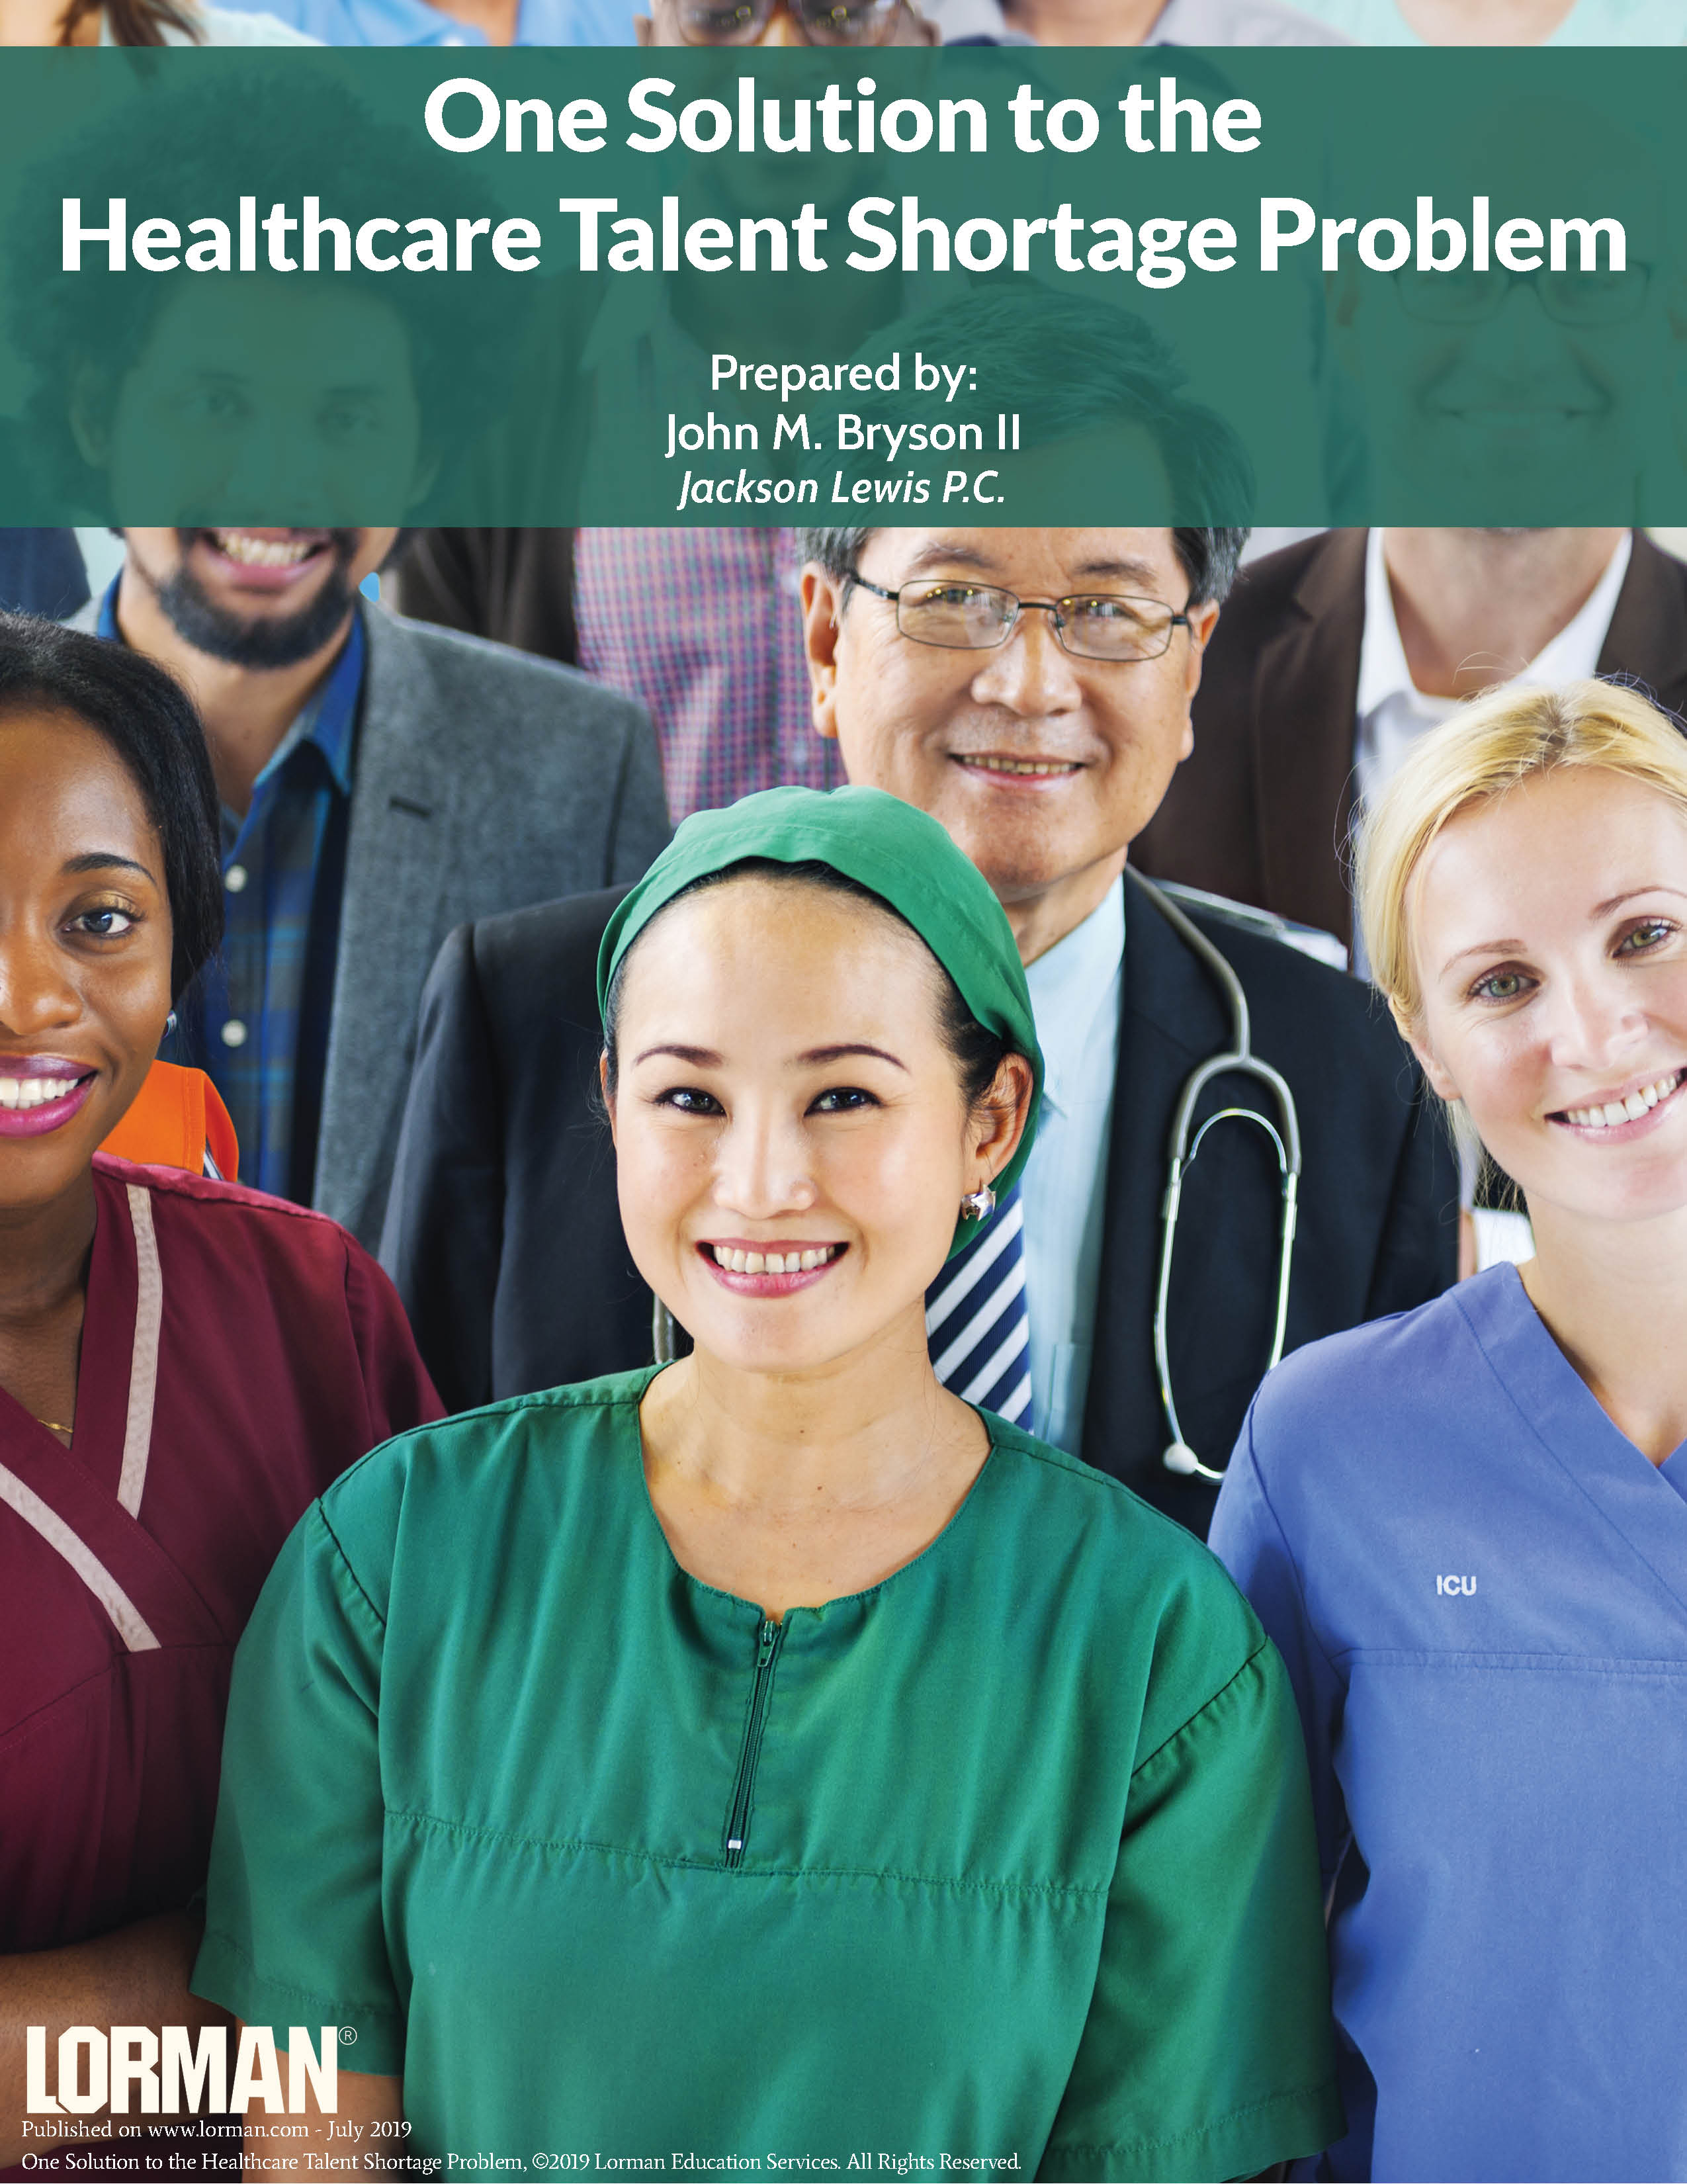 One Solution to the Healthcare Talent Shortage Problem